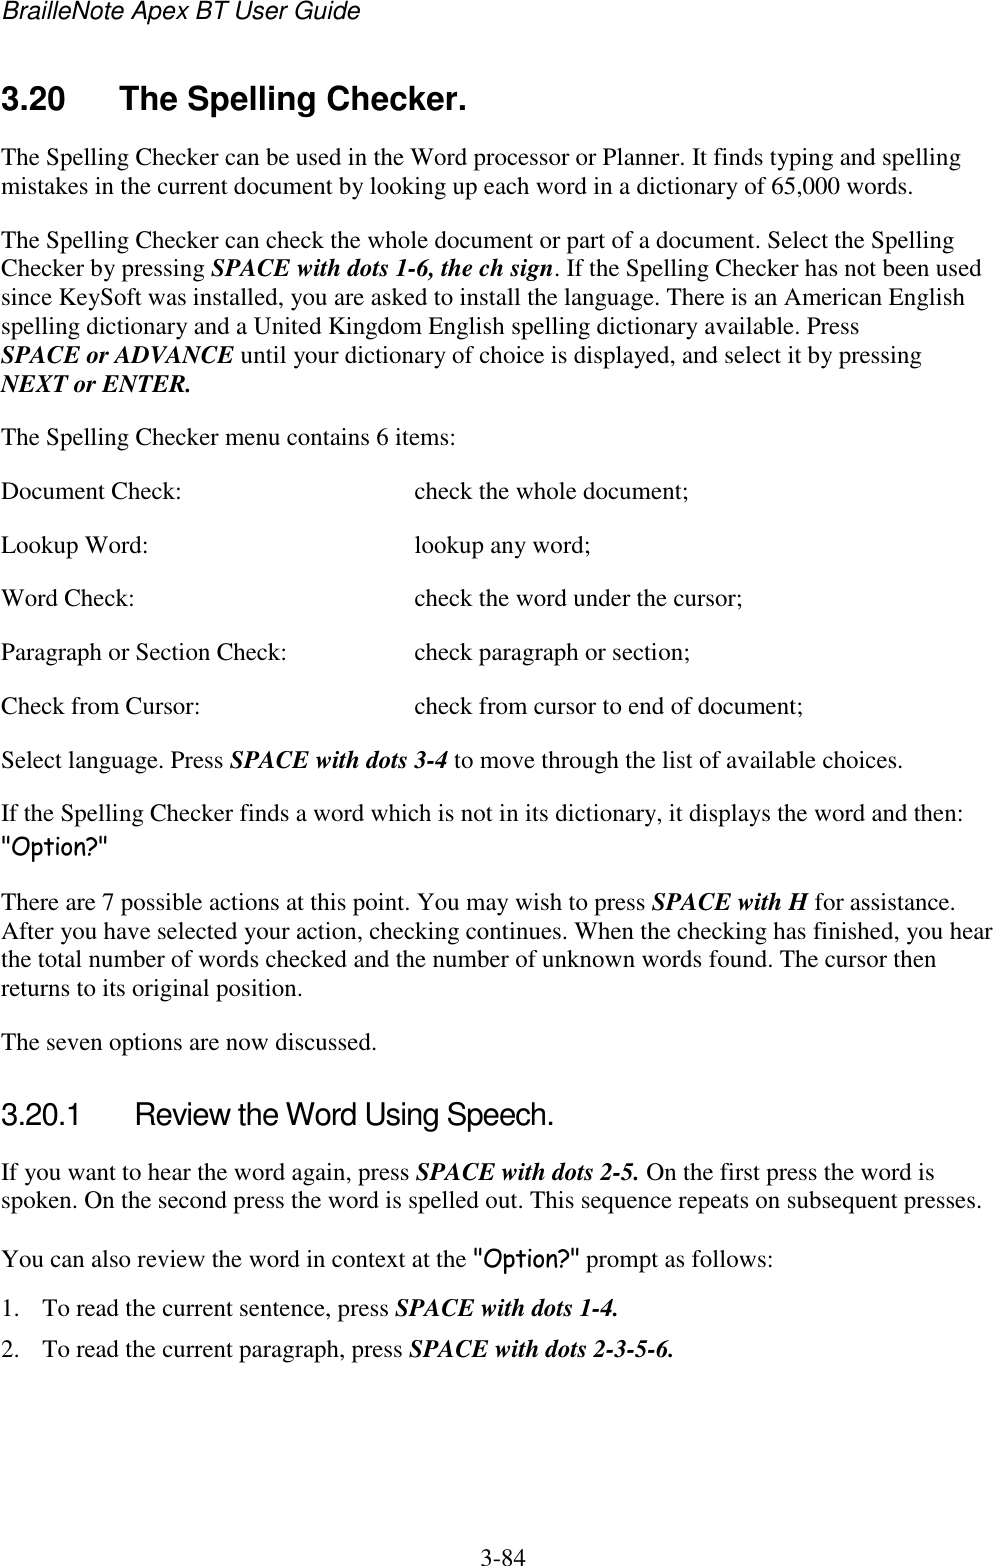 BrailleNote Apex BT User Guide   3-84   3.20  The Spelling Checker. The Spelling Checker can be used in the Word processor or Planner. It finds typing and spelling mistakes in the current document by looking up each word in a dictionary of 65,000 words. The Spelling Checker can check the whole document or part of a document. Select the Spelling Checker by pressing SPACE with dots 1-6, the ch sign. If the Spelling Checker has not been used since KeySoft was installed, you are asked to install the language. There is an American English spelling dictionary and a United Kingdom English spelling dictionary available. Press SPACE or ADVANCE until your dictionary of choice is displayed, and select it by pressing NEXT or ENTER. The Spelling Checker menu contains 6 items: Document Check:  check the whole document; Lookup Word:  lookup any word; Word Check:  check the word under the cursor; Paragraph or Section Check:  check paragraph or section; Check from Cursor:  check from cursor to end of document; Select language. Press SPACE with dots 3-4 to move through the list of available choices.  If the Spelling Checker finds a word which is not in its dictionary, it displays the word and then: &quot;Option?&quot; There are 7 possible actions at this point. You may wish to press SPACE with H for assistance. After you have selected your action, checking continues. When the checking has finished, you hear the total number of words checked and the number of unknown words found. The cursor then returns to its original position. The seven options are now discussed.  3.20.1  Review the Word Using Speech. If you want to hear the word again, press SPACE with dots 2-5. On the first press the word is spoken. On the second press the word is spelled out. This sequence repeats on subsequent presses. You can also review the word in context at the &quot;Option?&quot; prompt as follows: 1. To read the current sentence, press SPACE with dots 1-4. 2. To read the current paragraph, press SPACE with dots 2-3-5-6. 